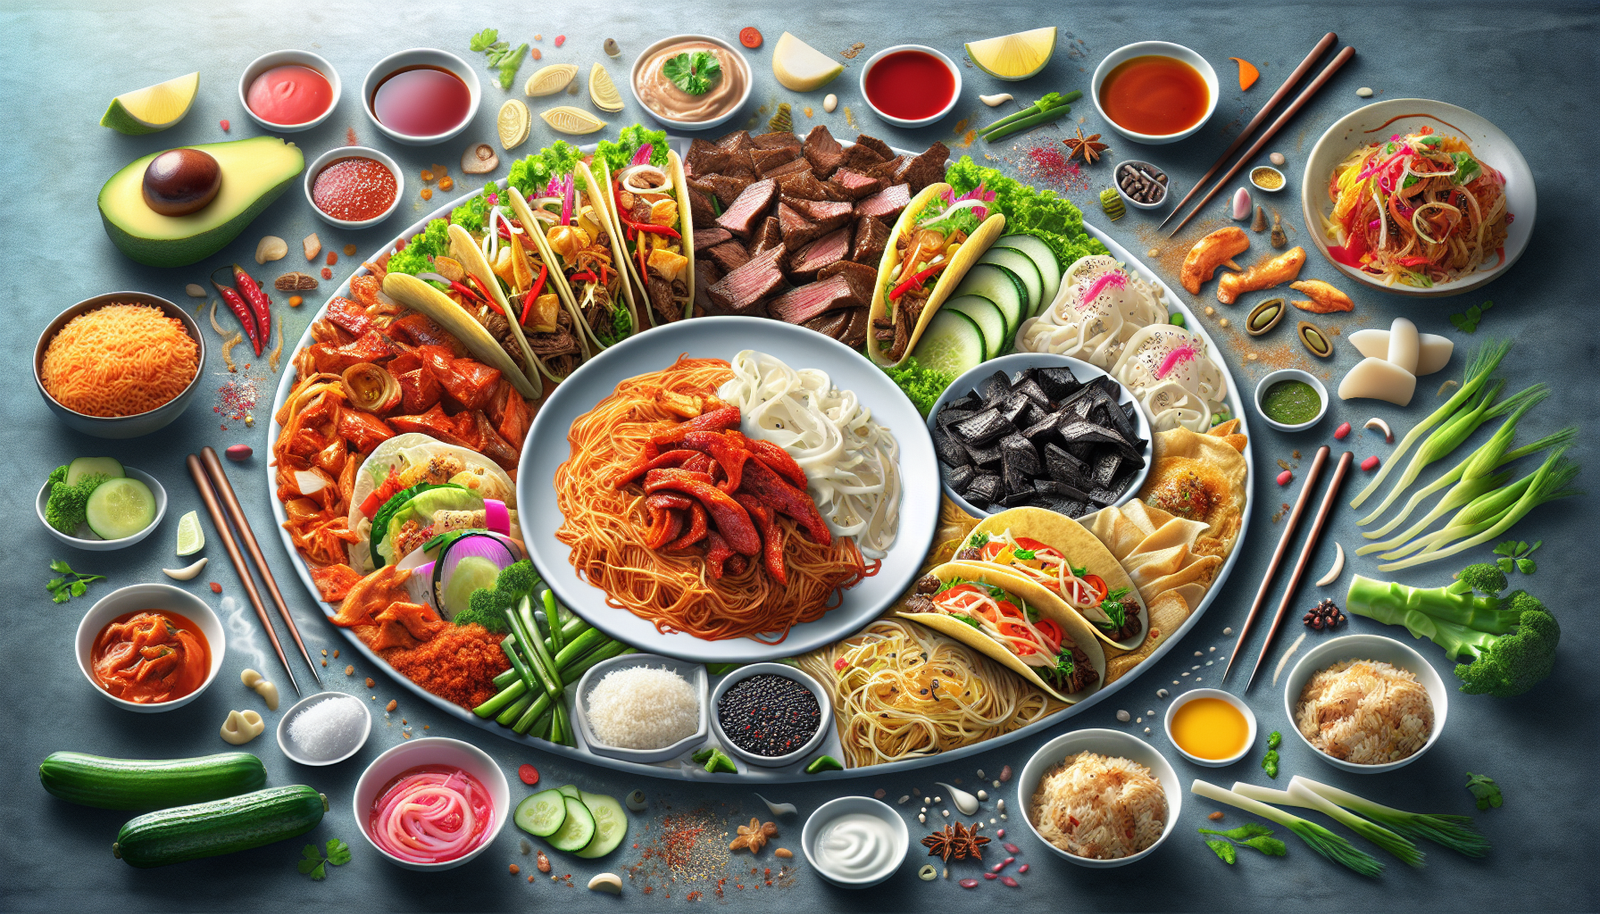 What Are The Current Trends In Incorporating Korean Flavors Into Global Cuisine?